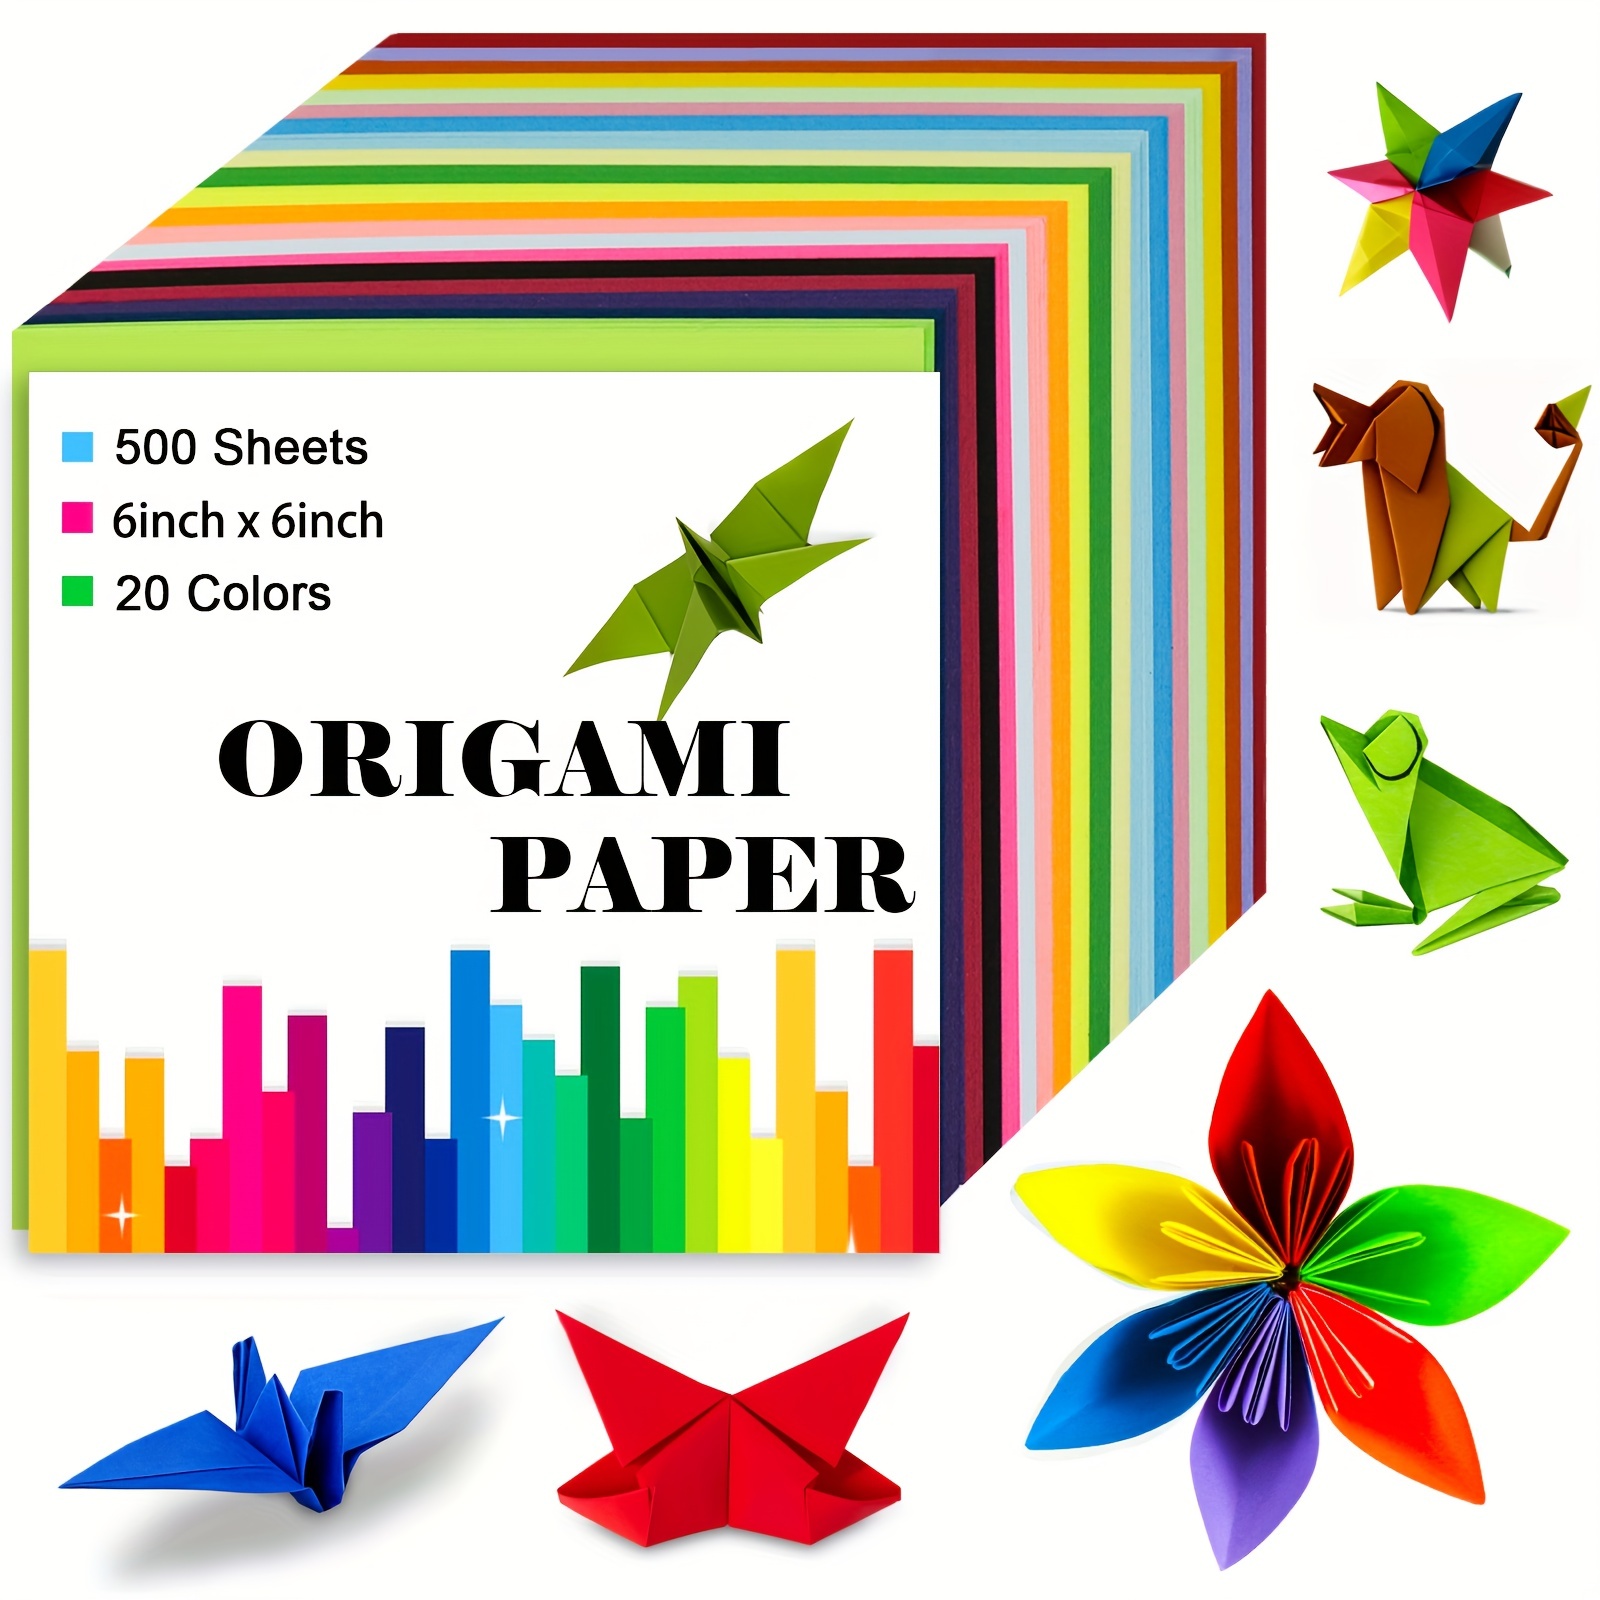  Origami Paper 6x6 Double Sided 50 Sheets 10 Colors